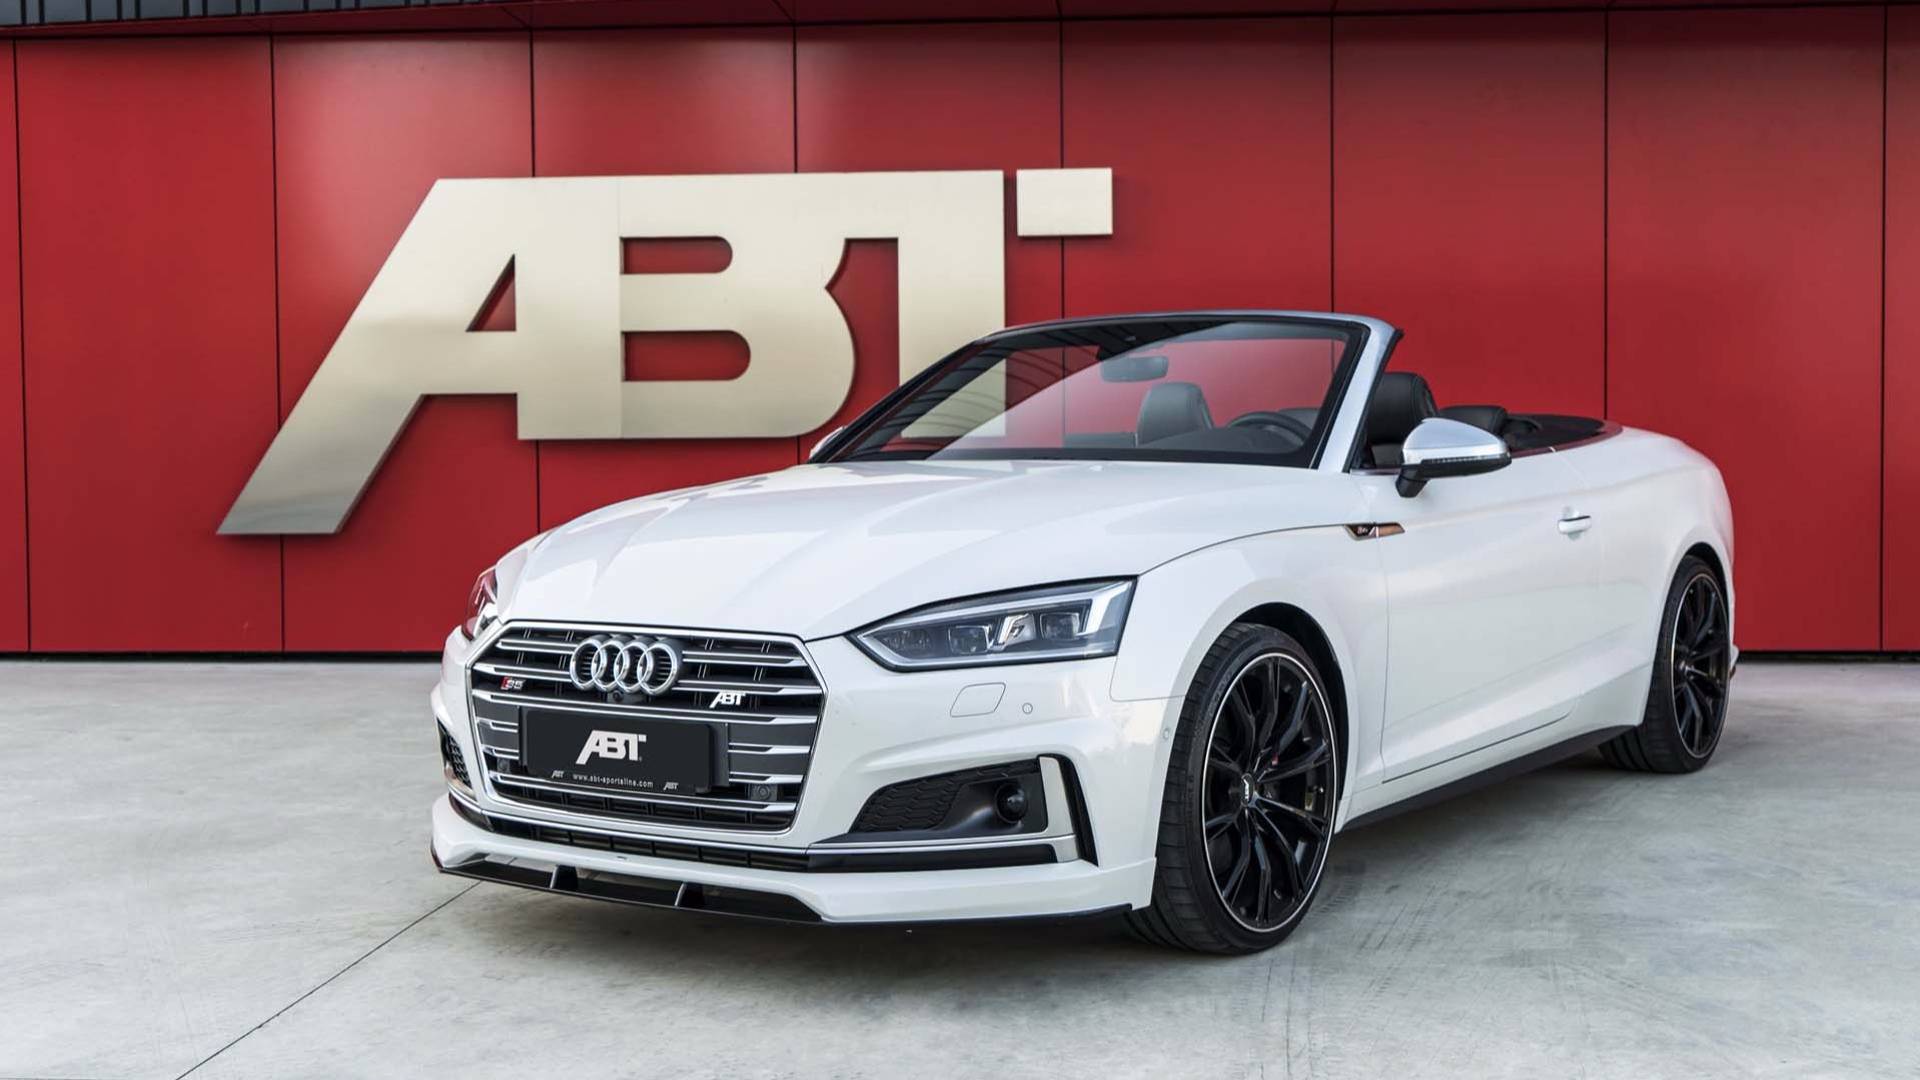 Audi S5 Gets 425 HP & Body Kit from ABT - autoevolution